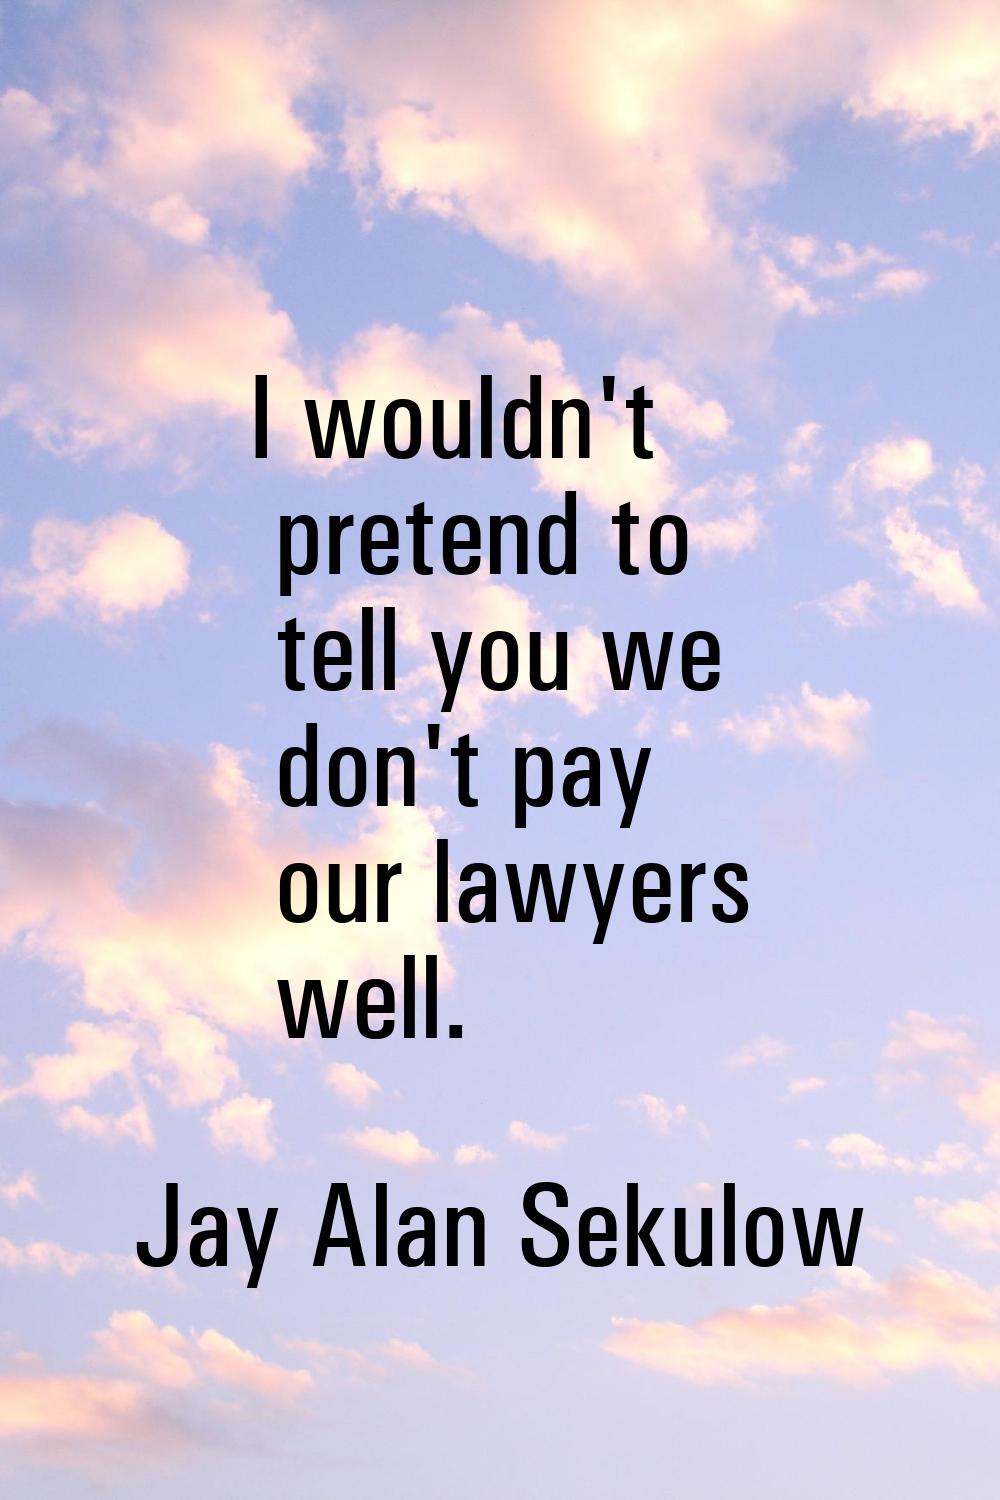 I wouldn't pretend to tell you we don't pay our lawyers well.